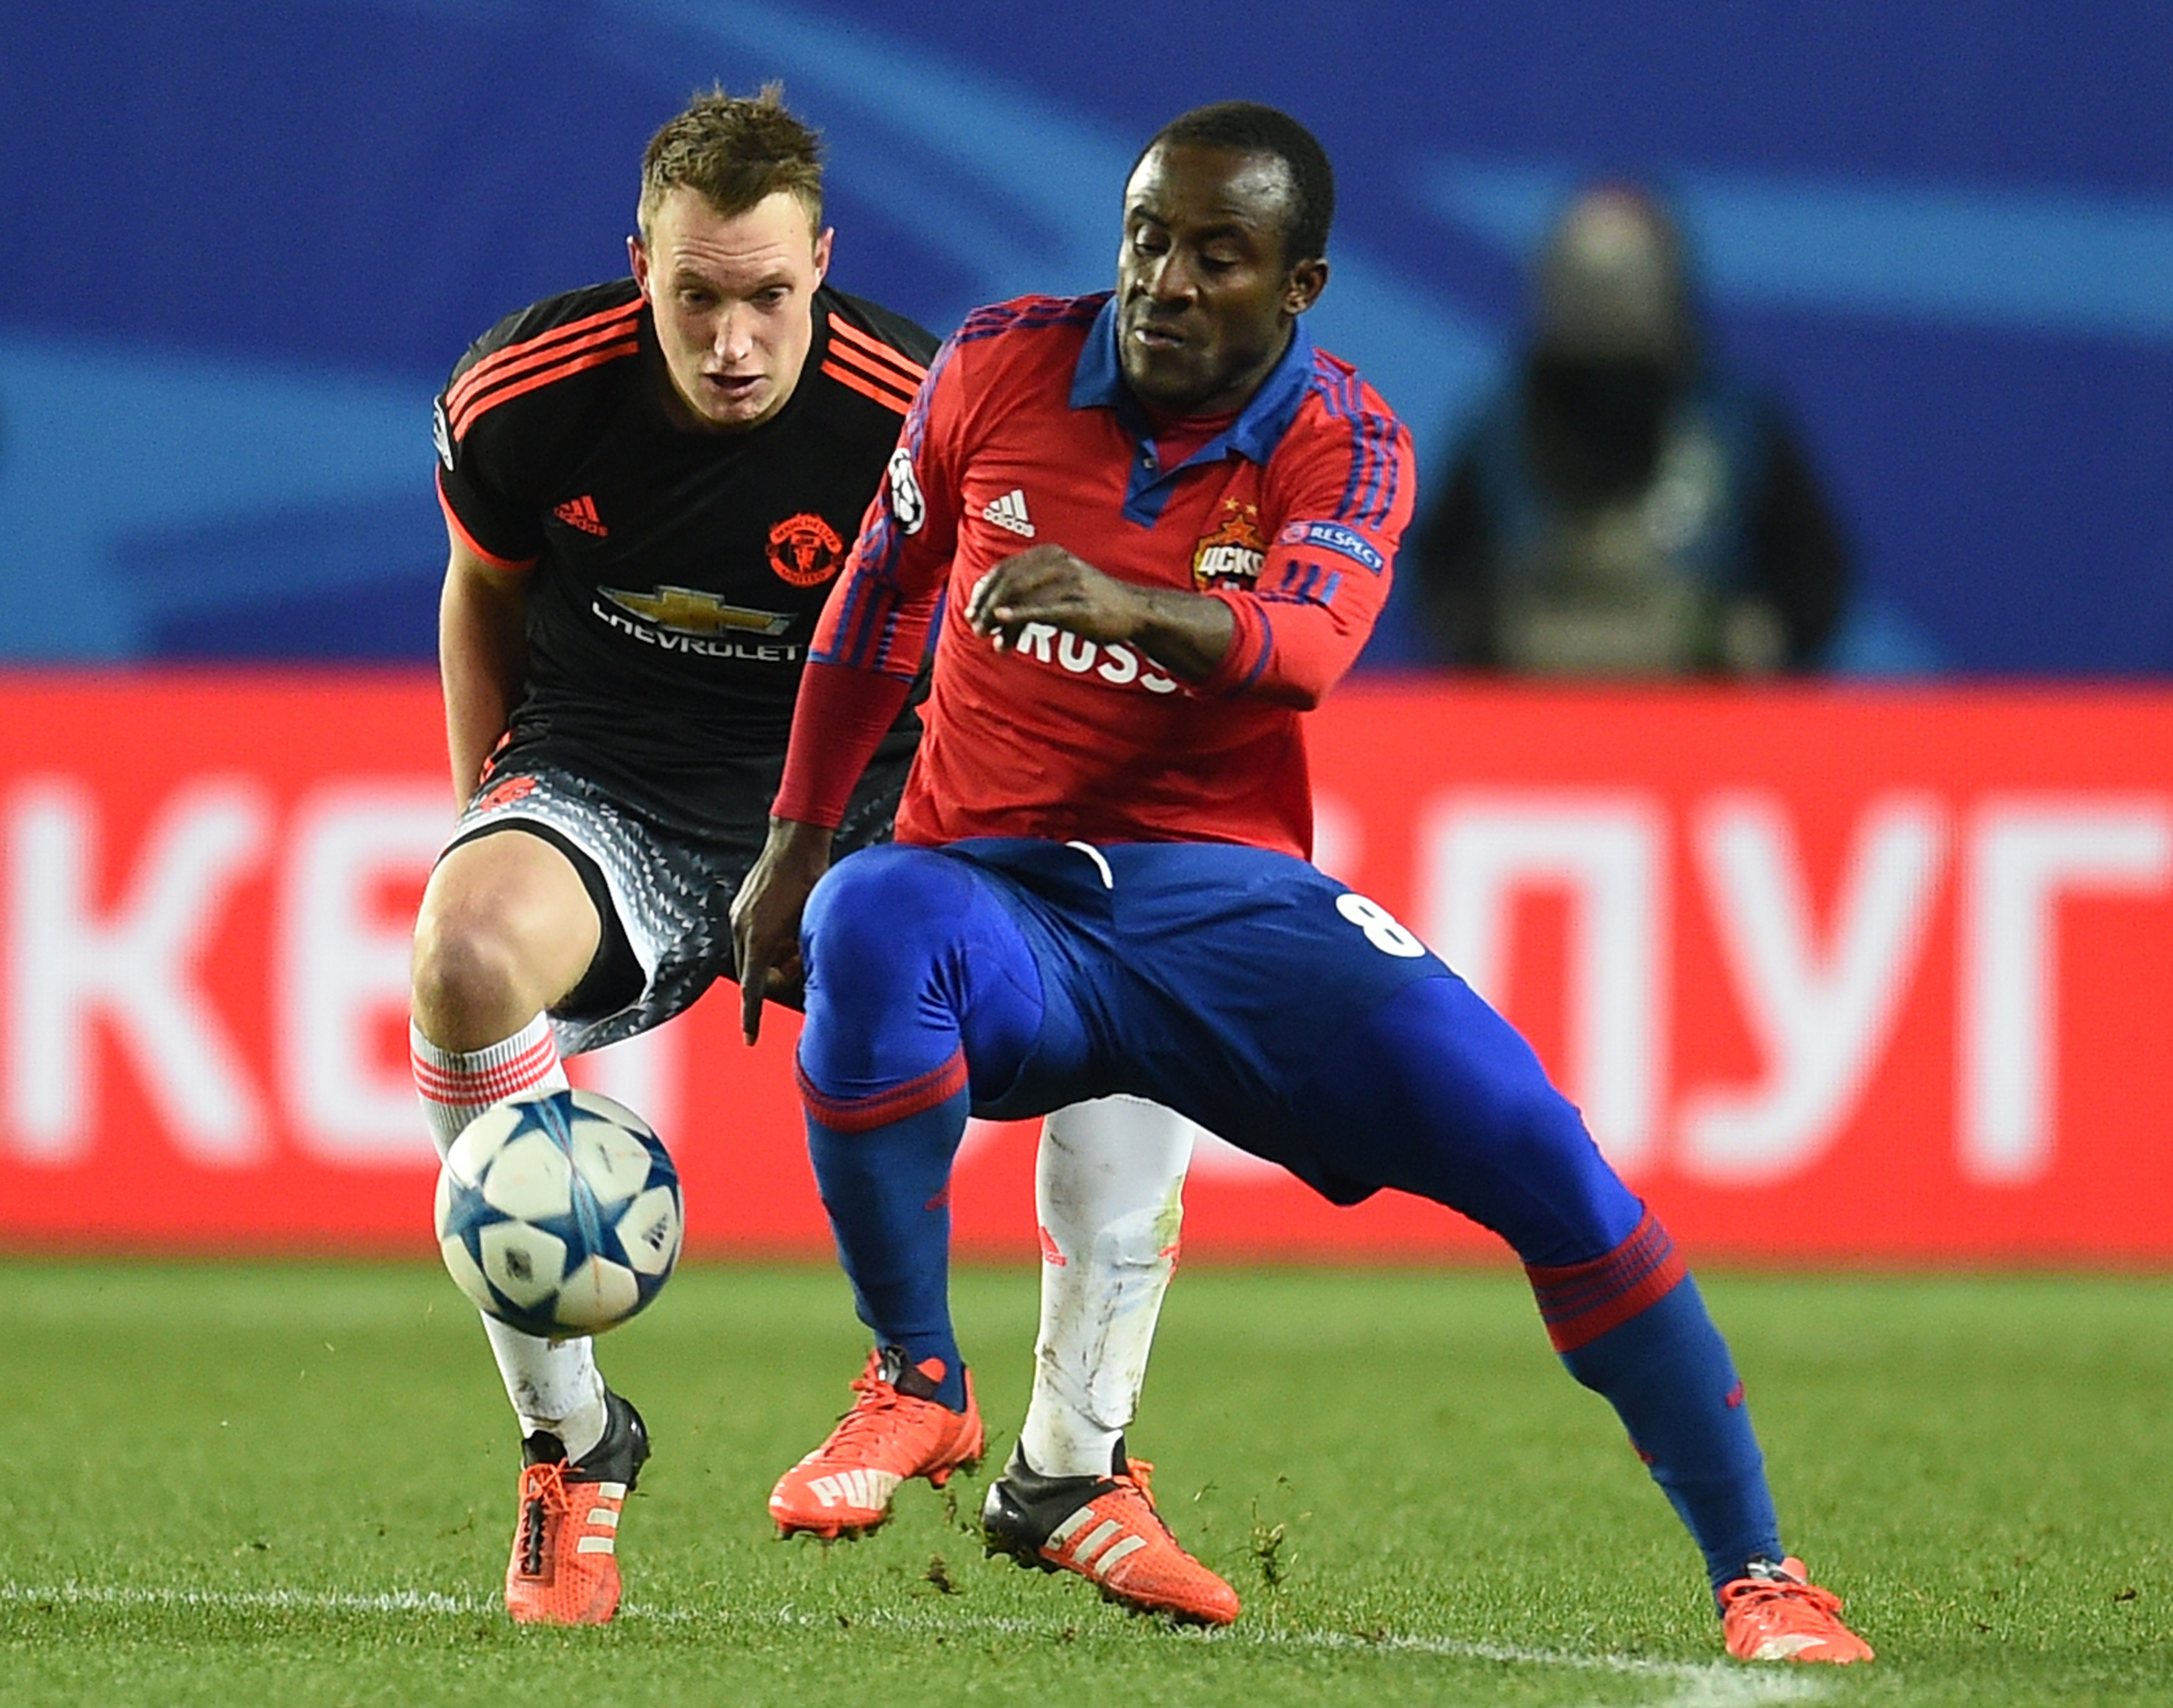 Doumbia and Phil Jones will square off once again on Tuesday. (Getty)